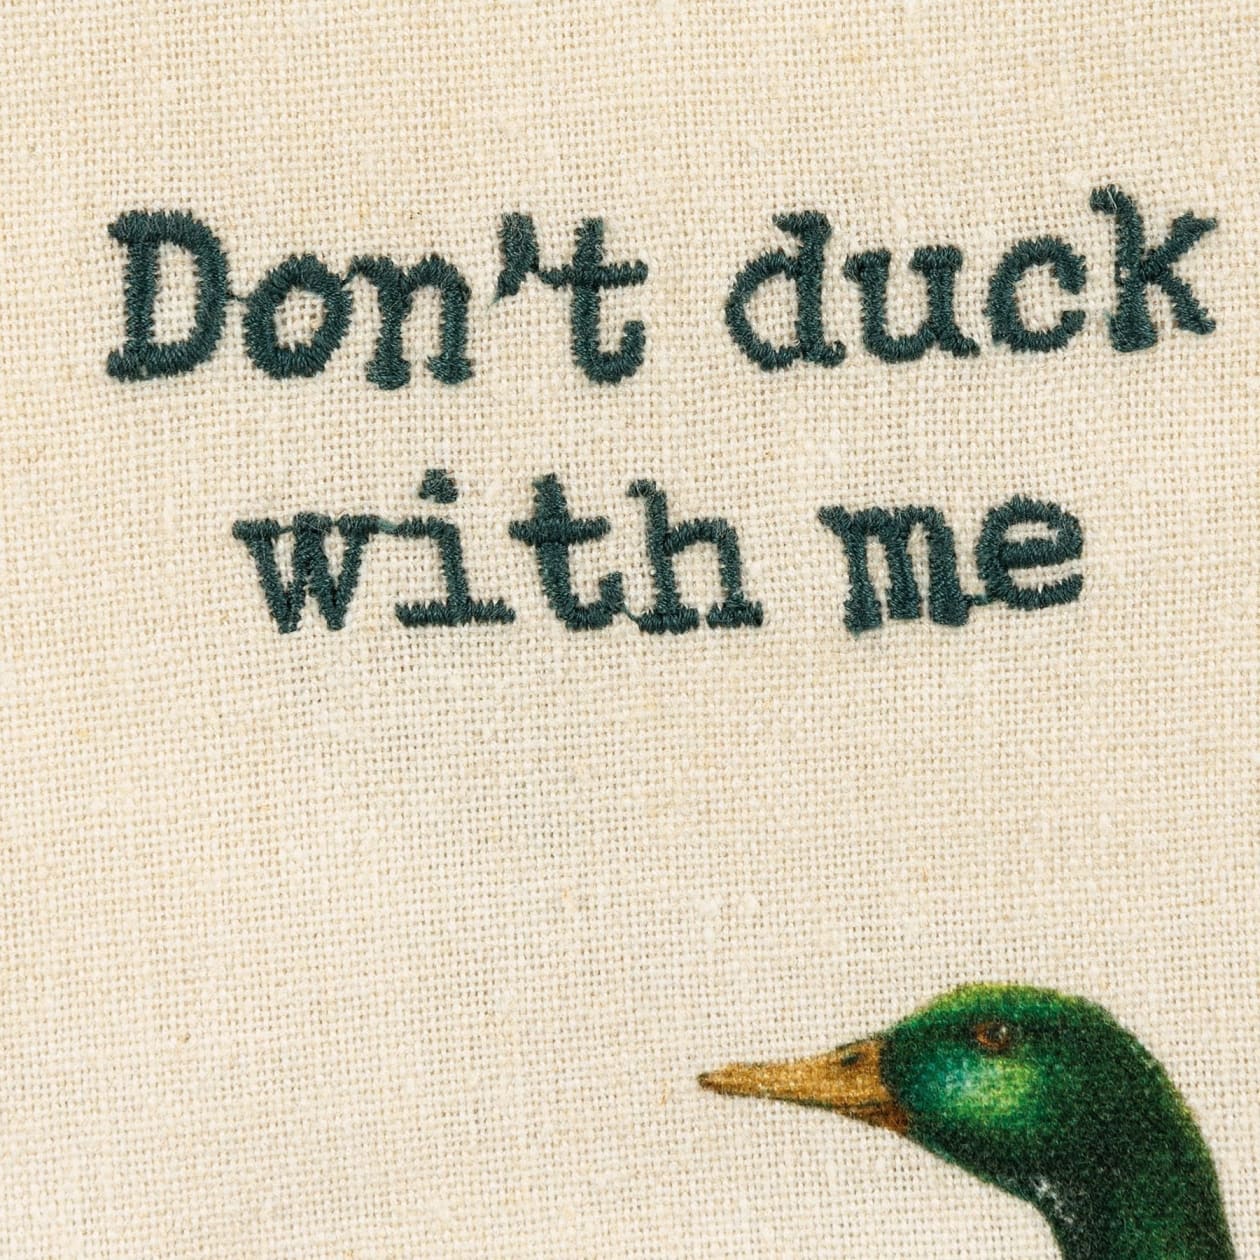 Don't Duck With Me Dish Cloth Towel | Cotten Linen Novelty Tea Towel | Embroidered Text | 18" x 28"